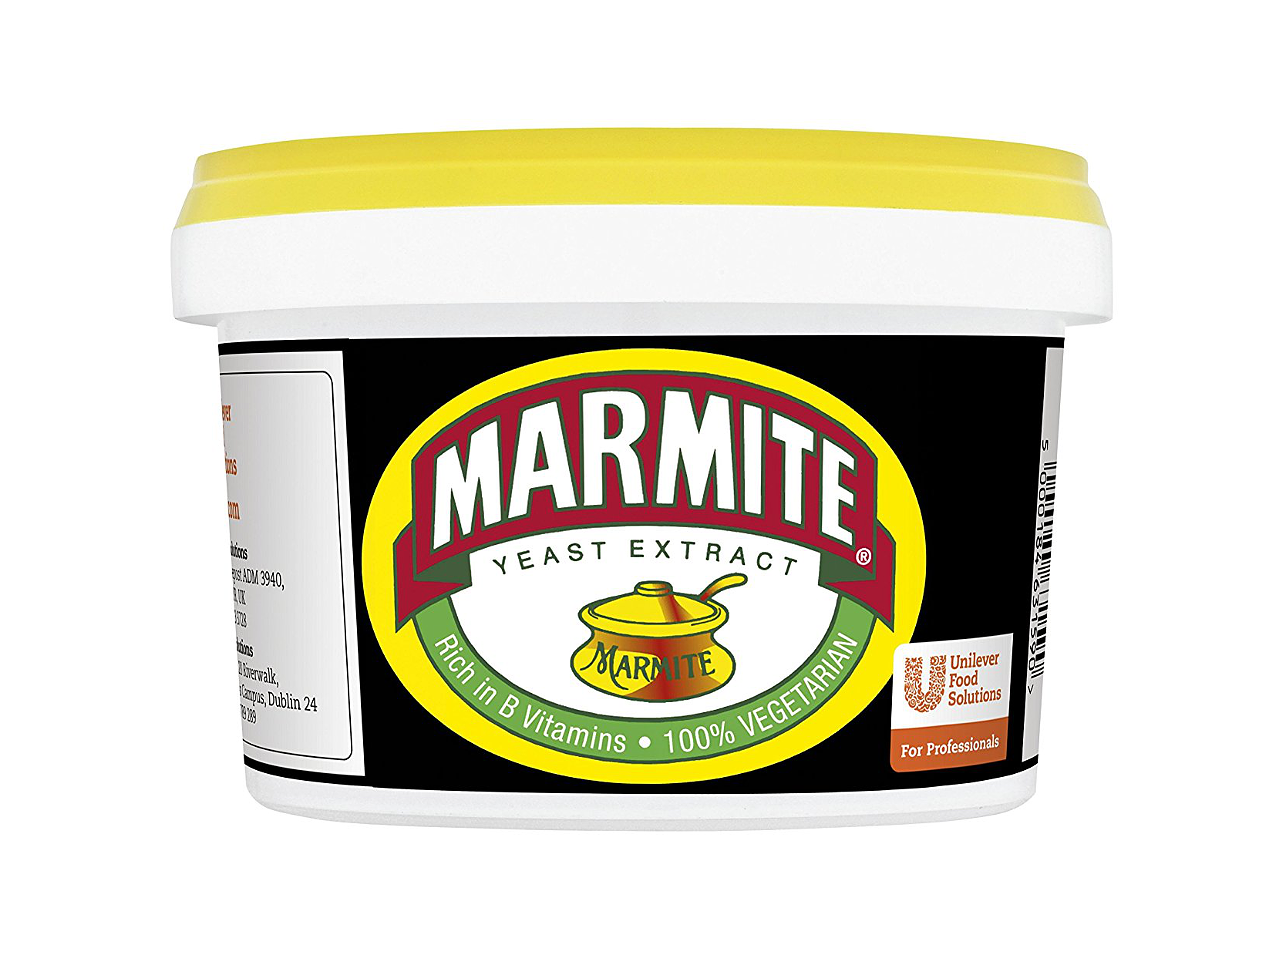 MARMITE 600g Catering Tub Yeast Extract 